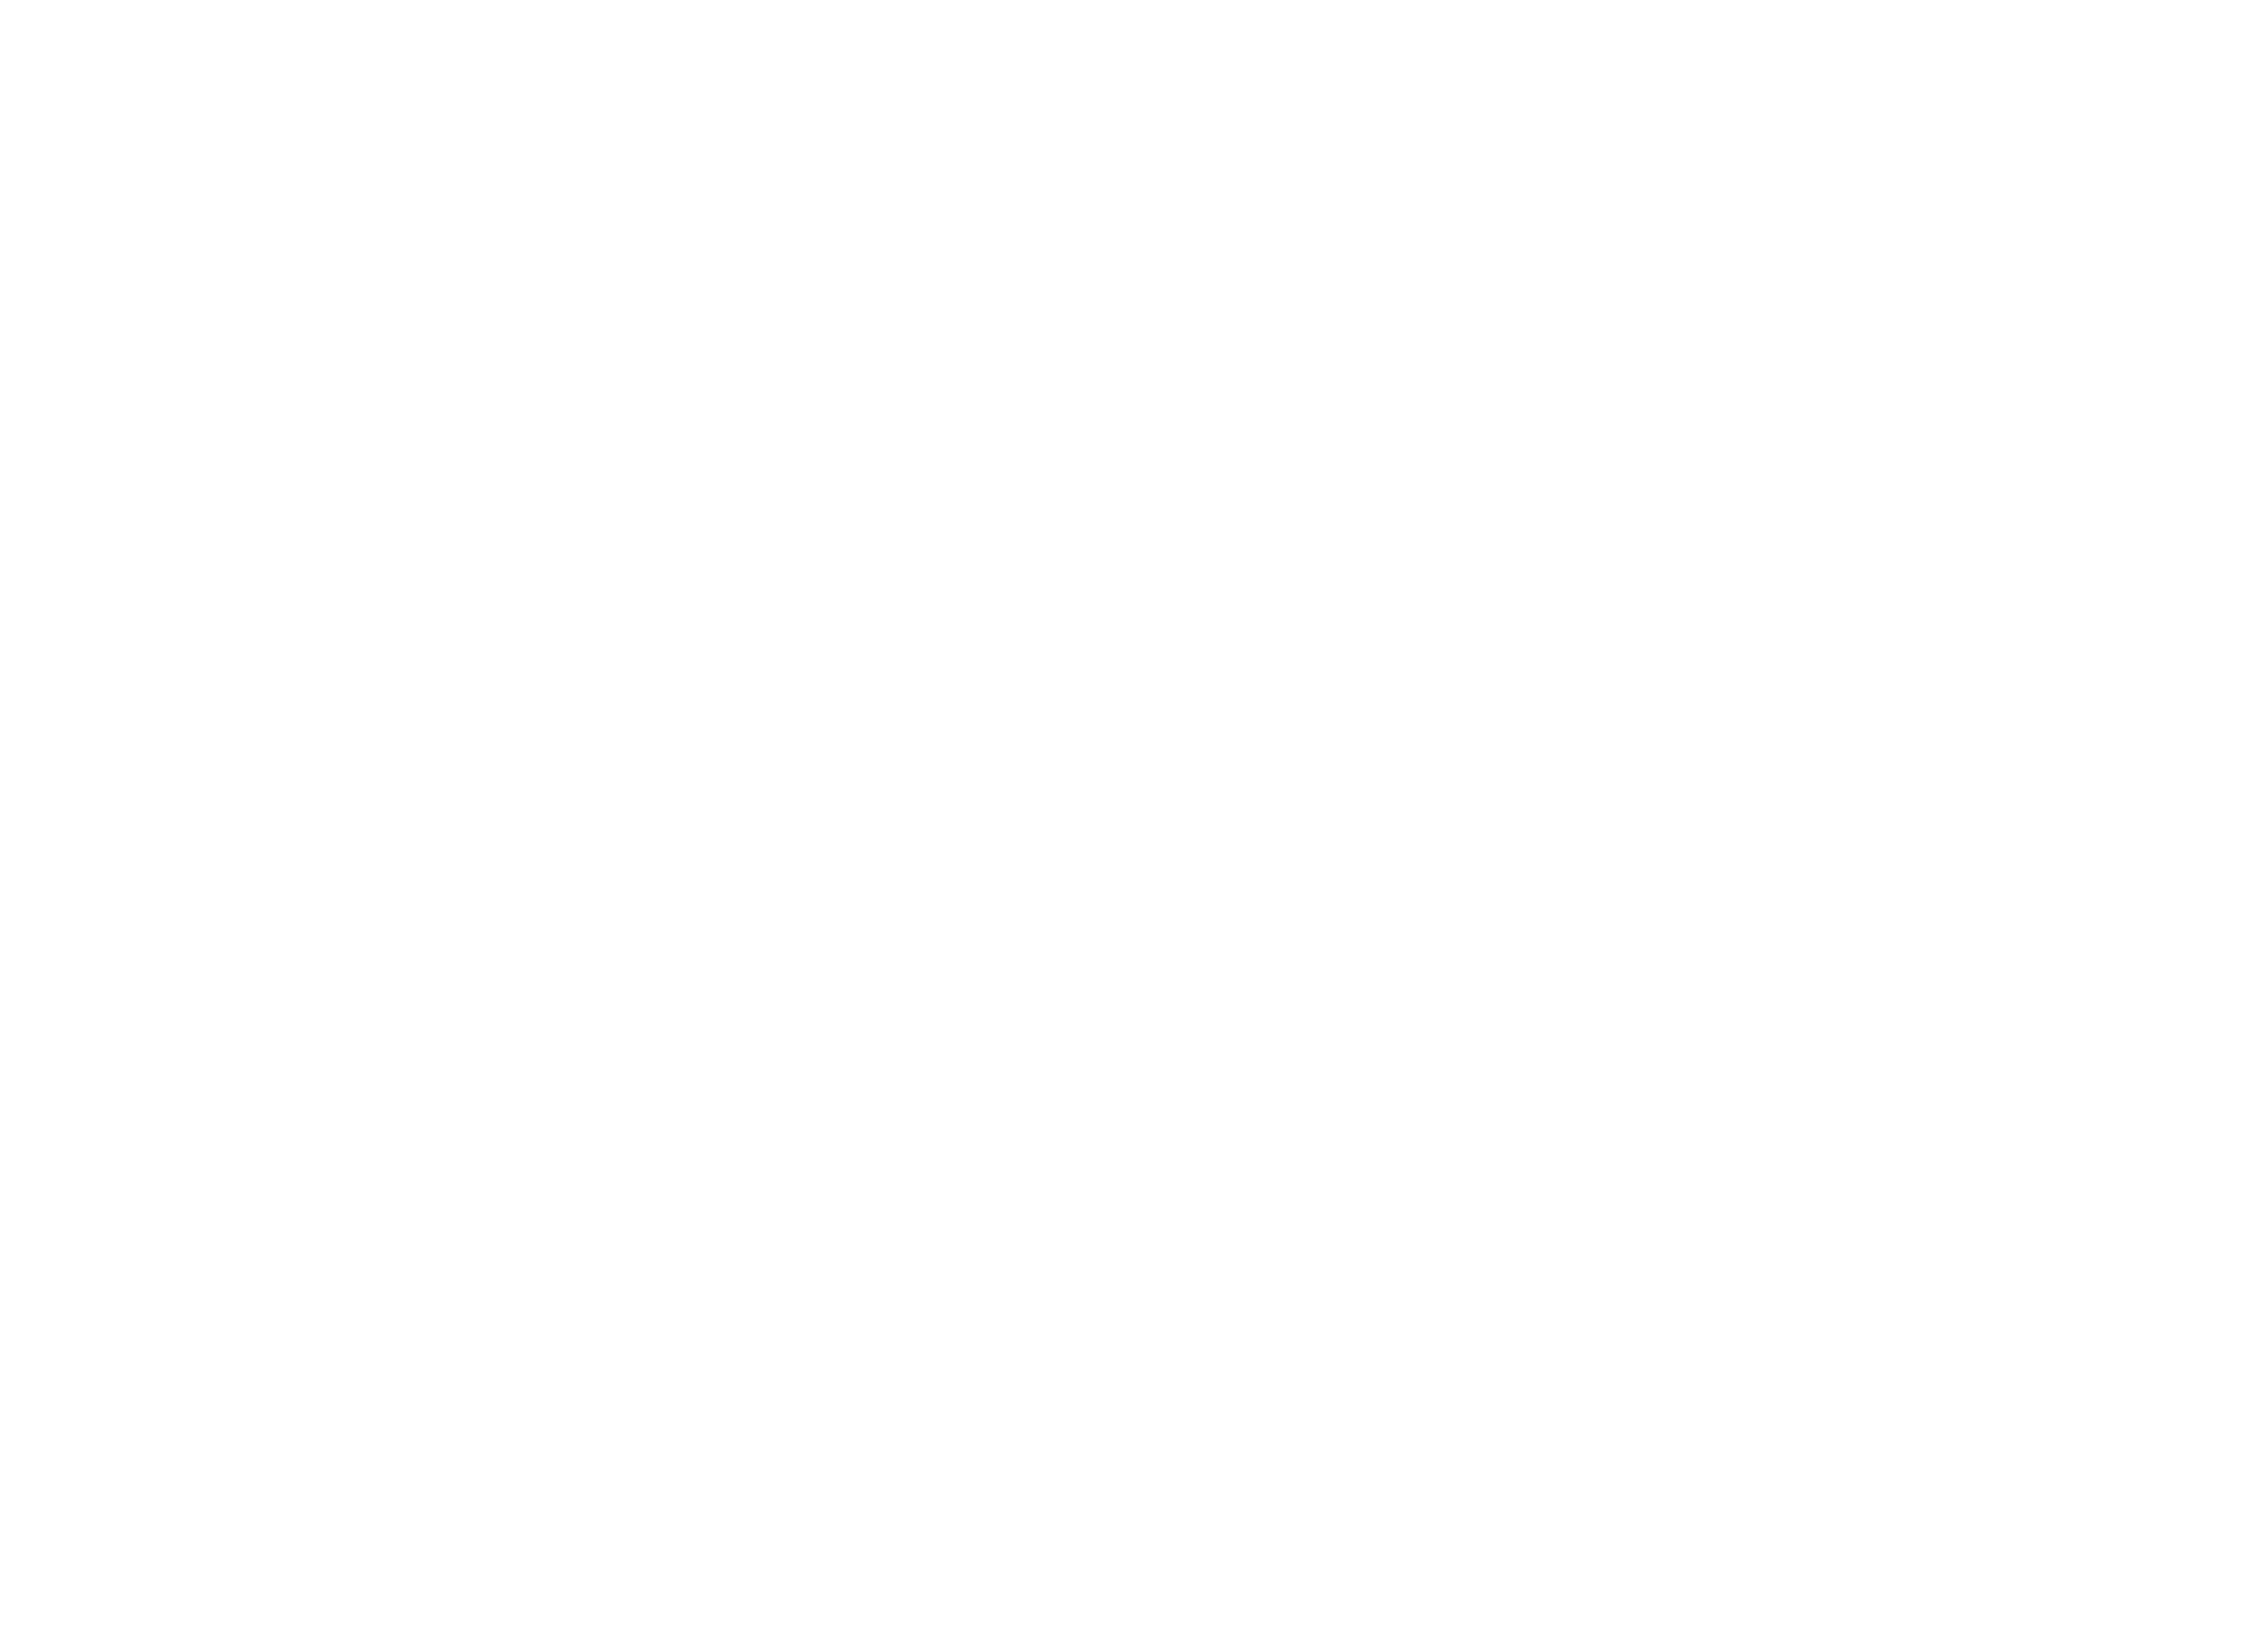 Exception Forge